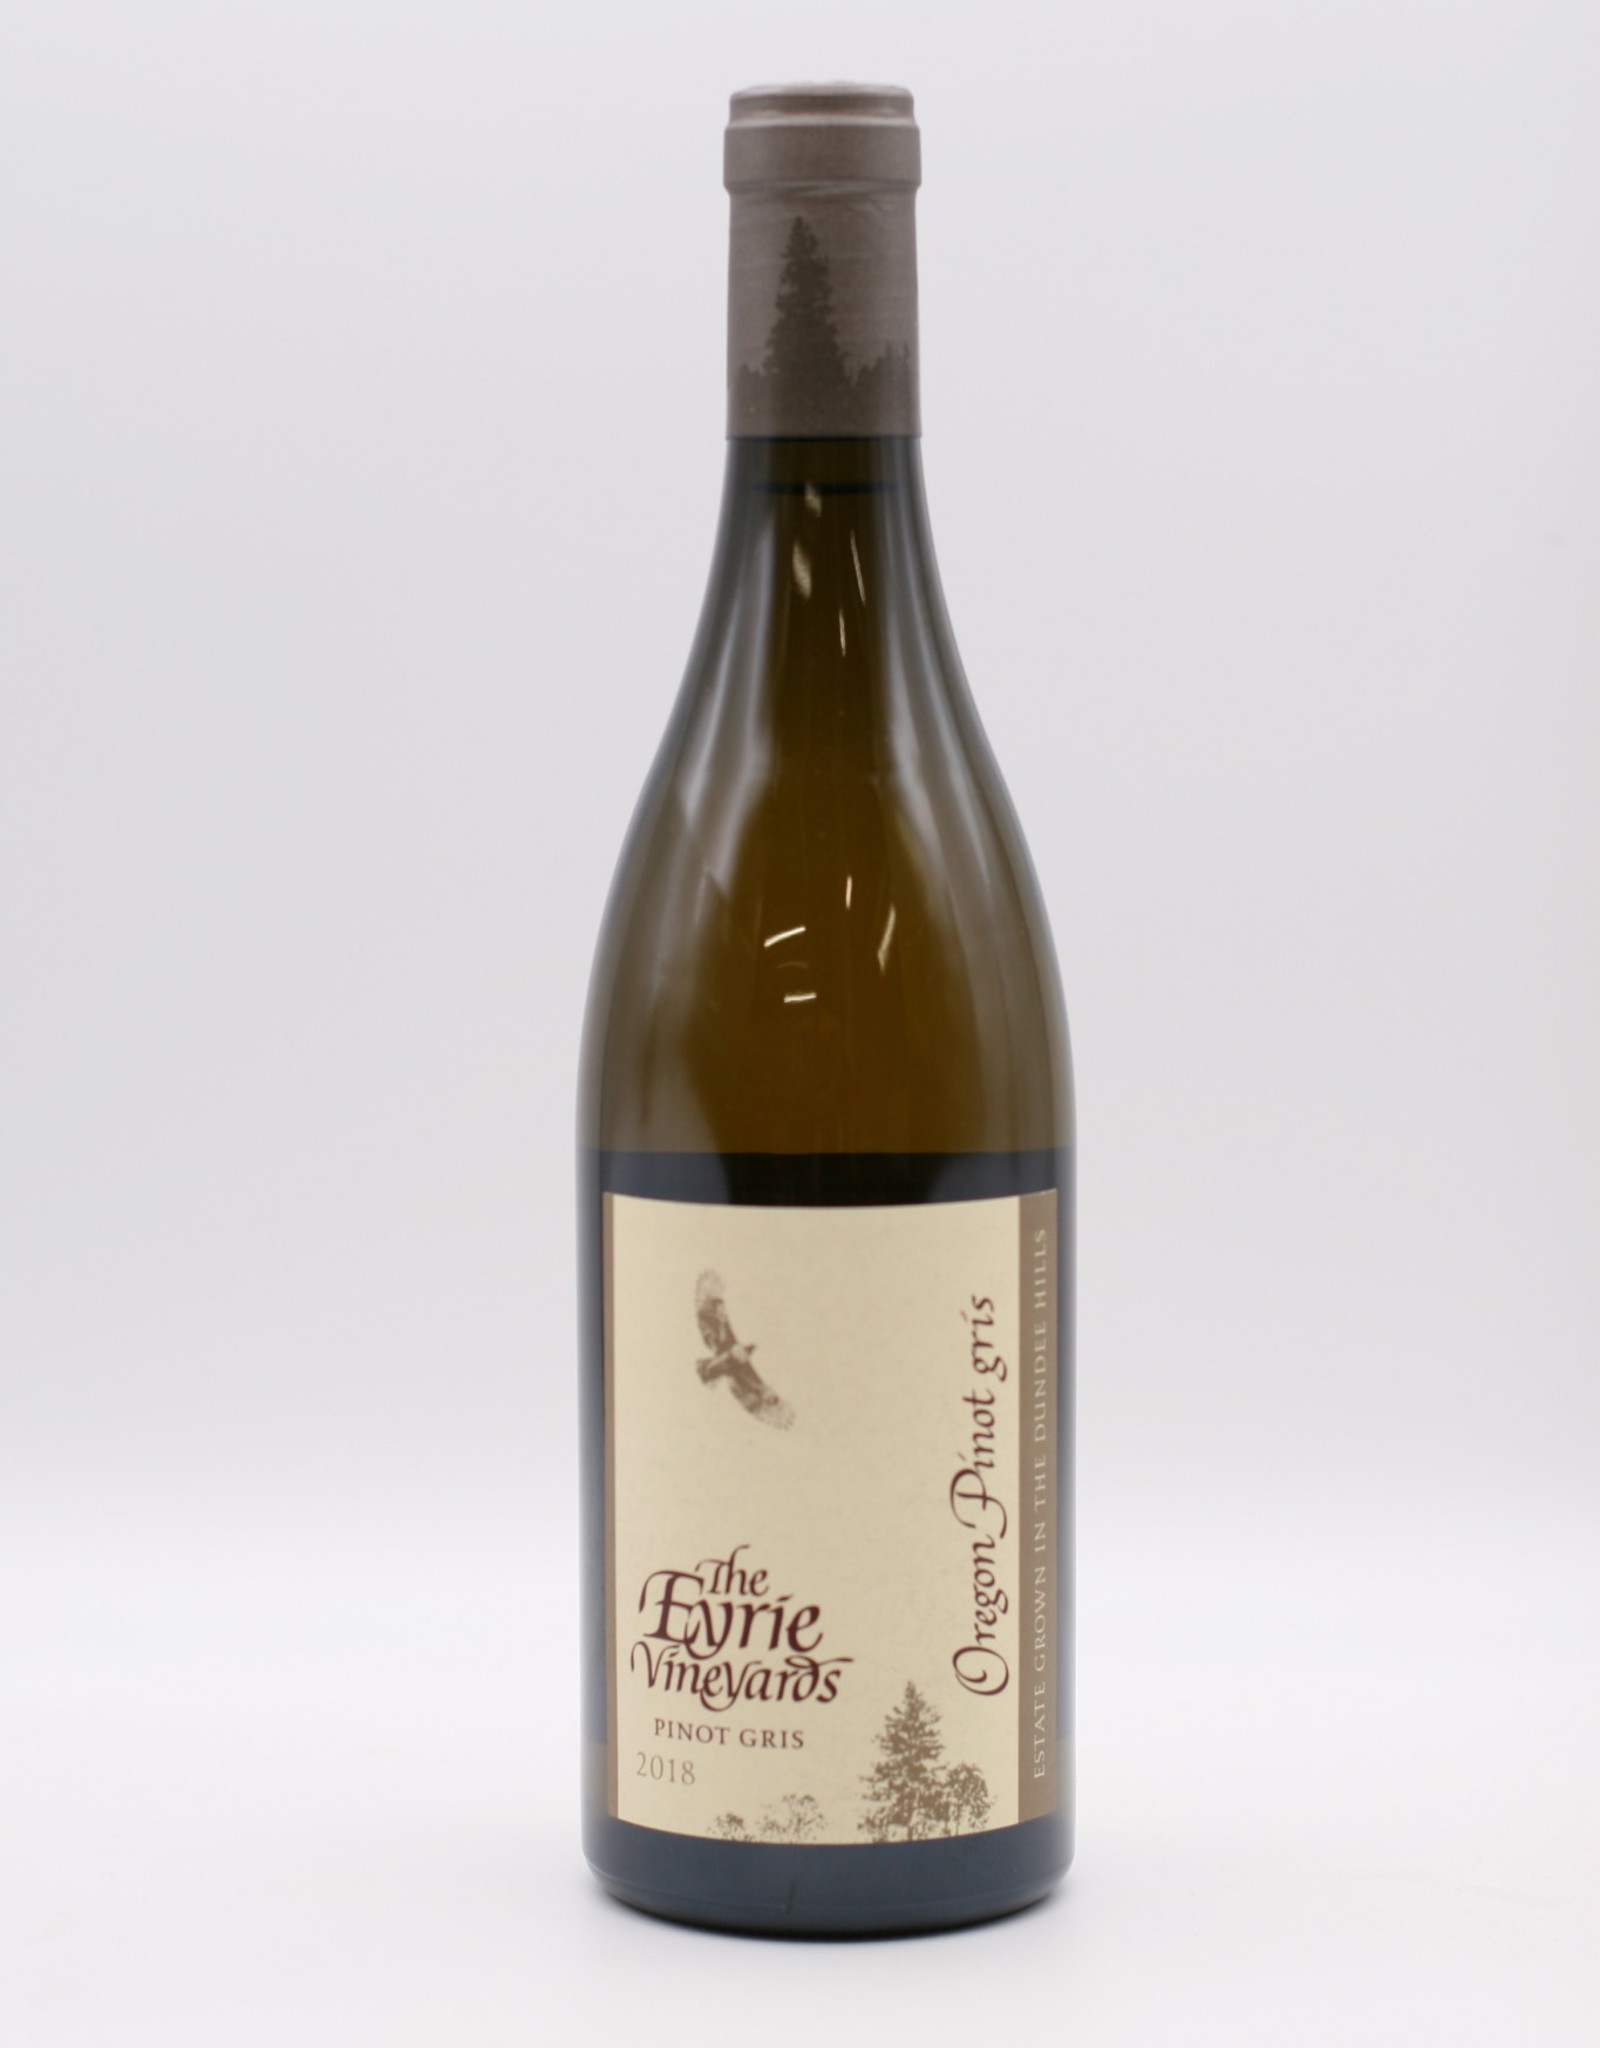 Eyrie pinot gris